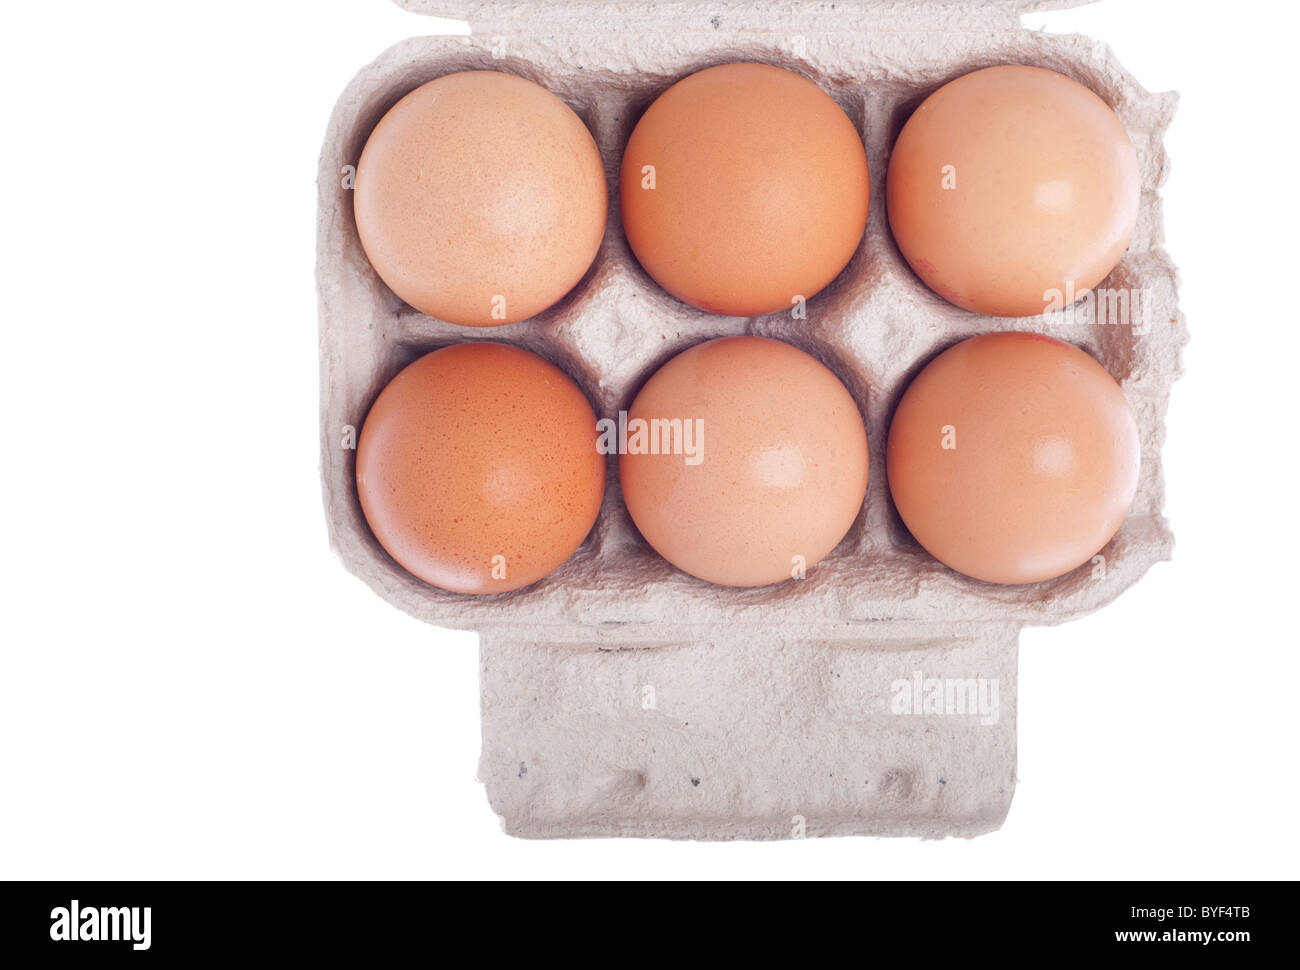 detail of six eggs in a carton box isolated on white background Stock Photo